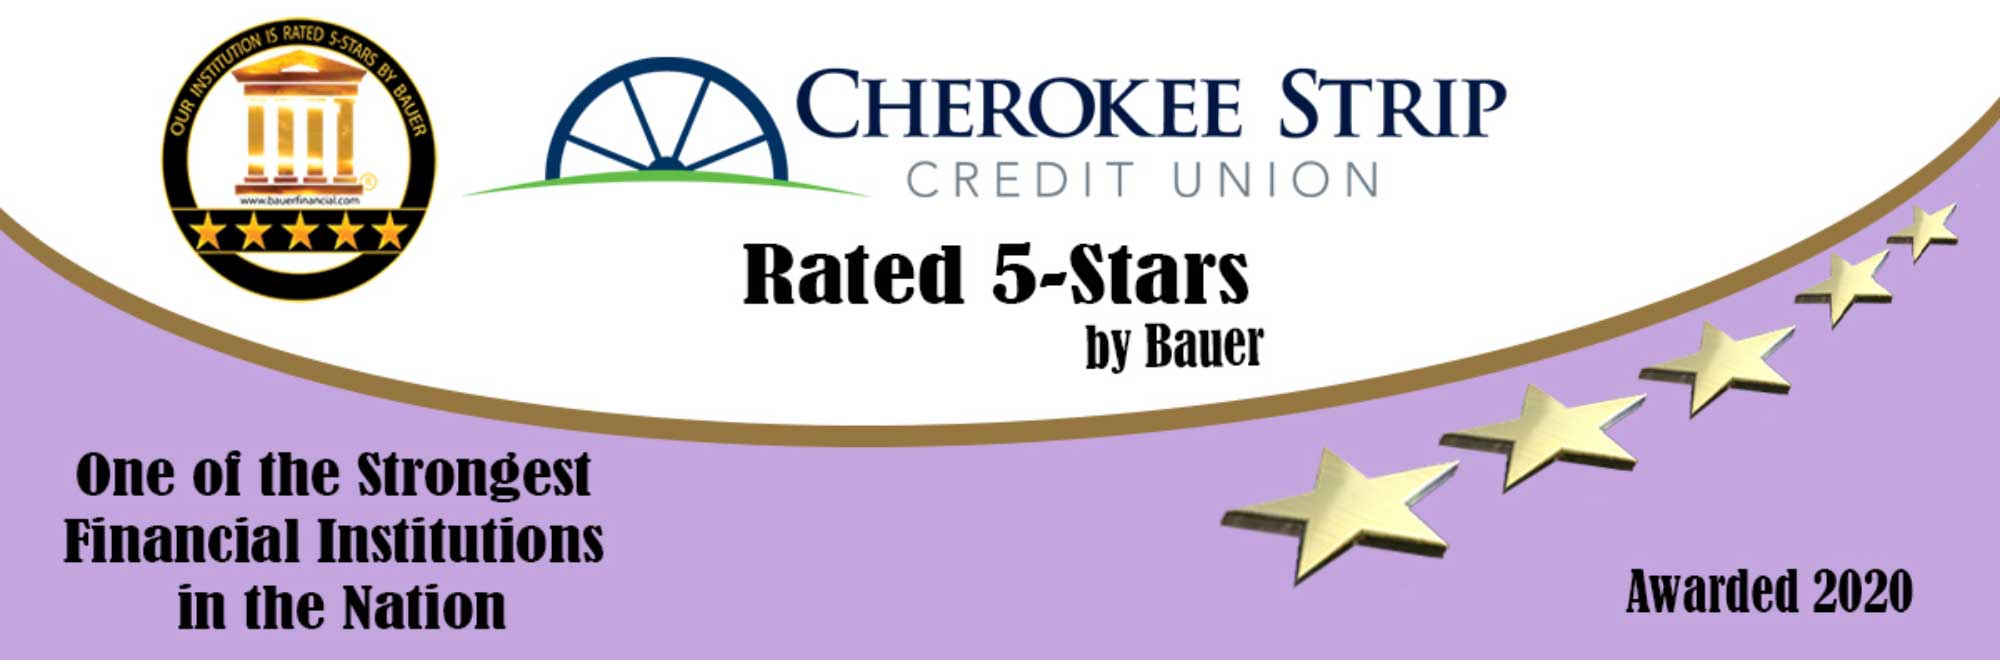 cherokee strip rated 5 starts by bauer